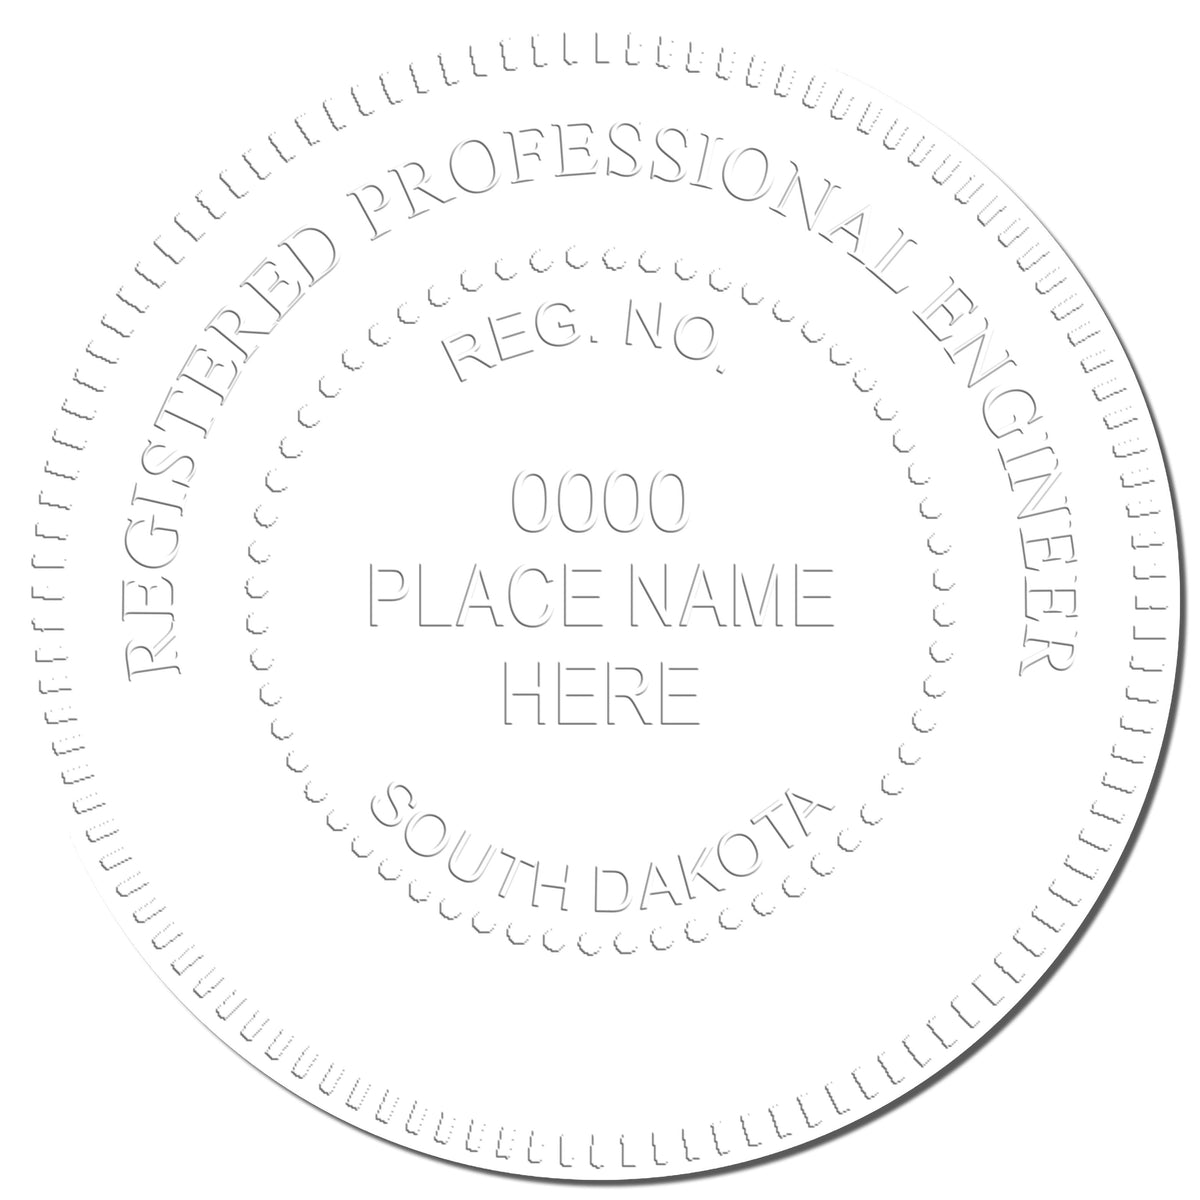 This paper is stamped with a sample imprint of the Gift South Dakota Engineer Seal, signifying its quality and reliability.